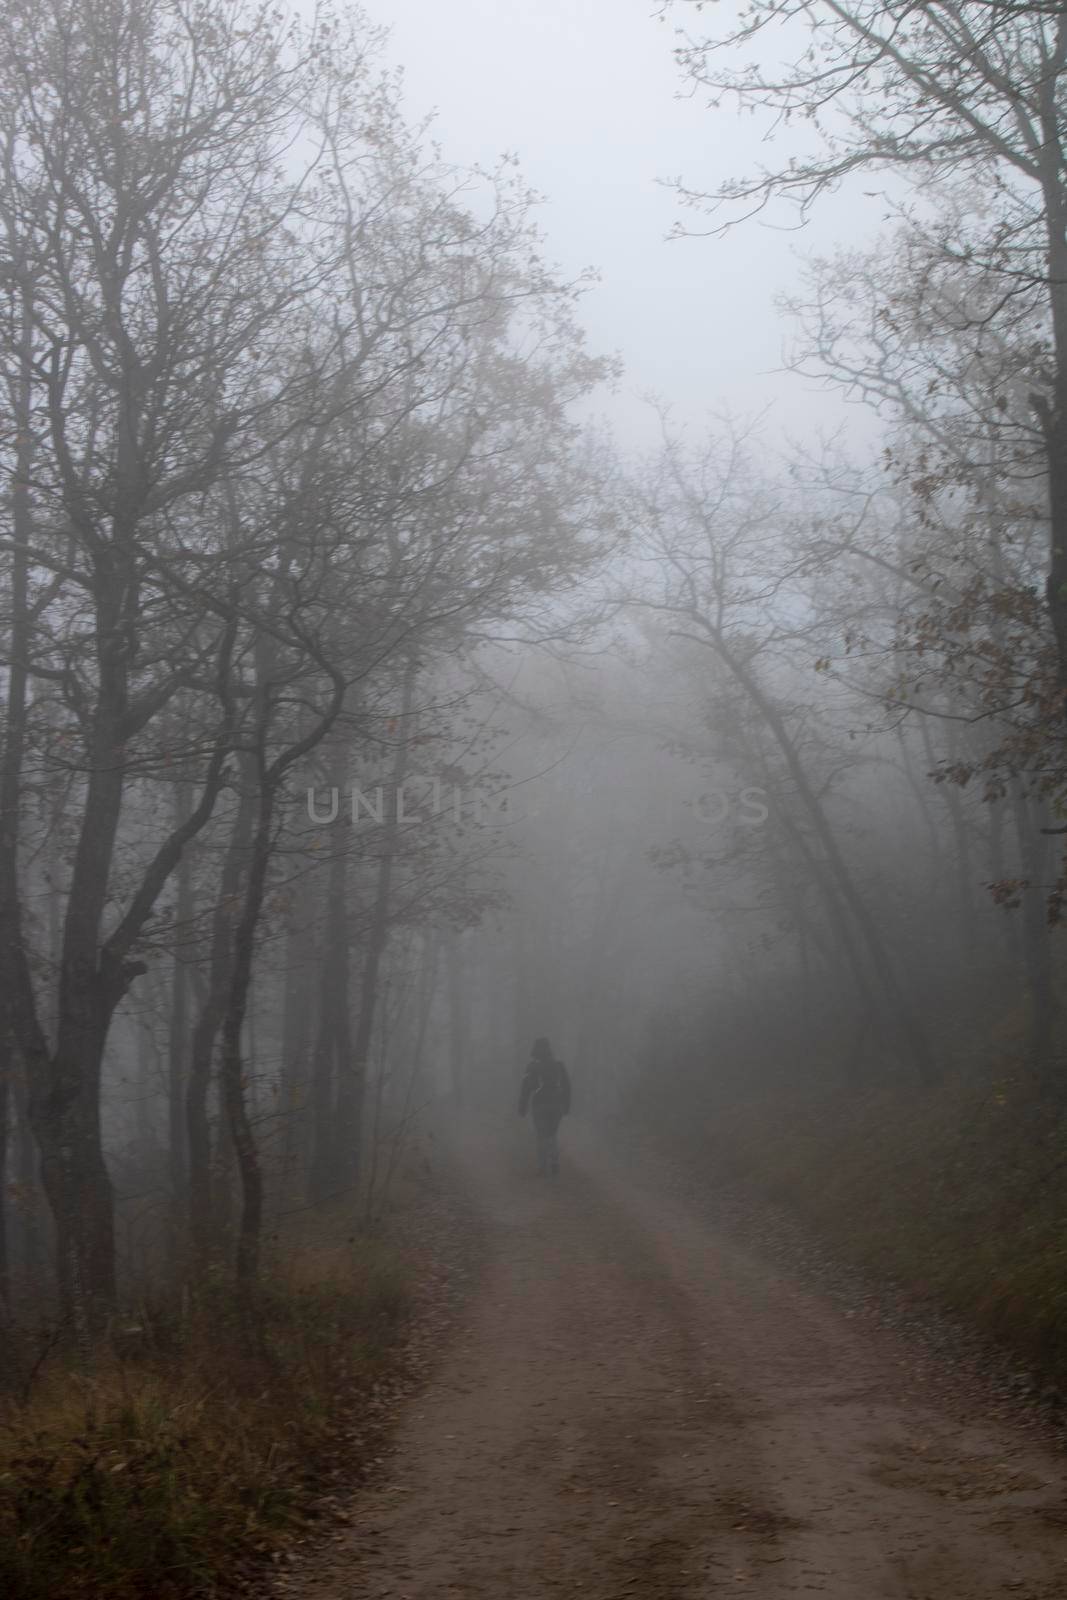 Foggy dark landscape showing some trees and a girl walking on a path